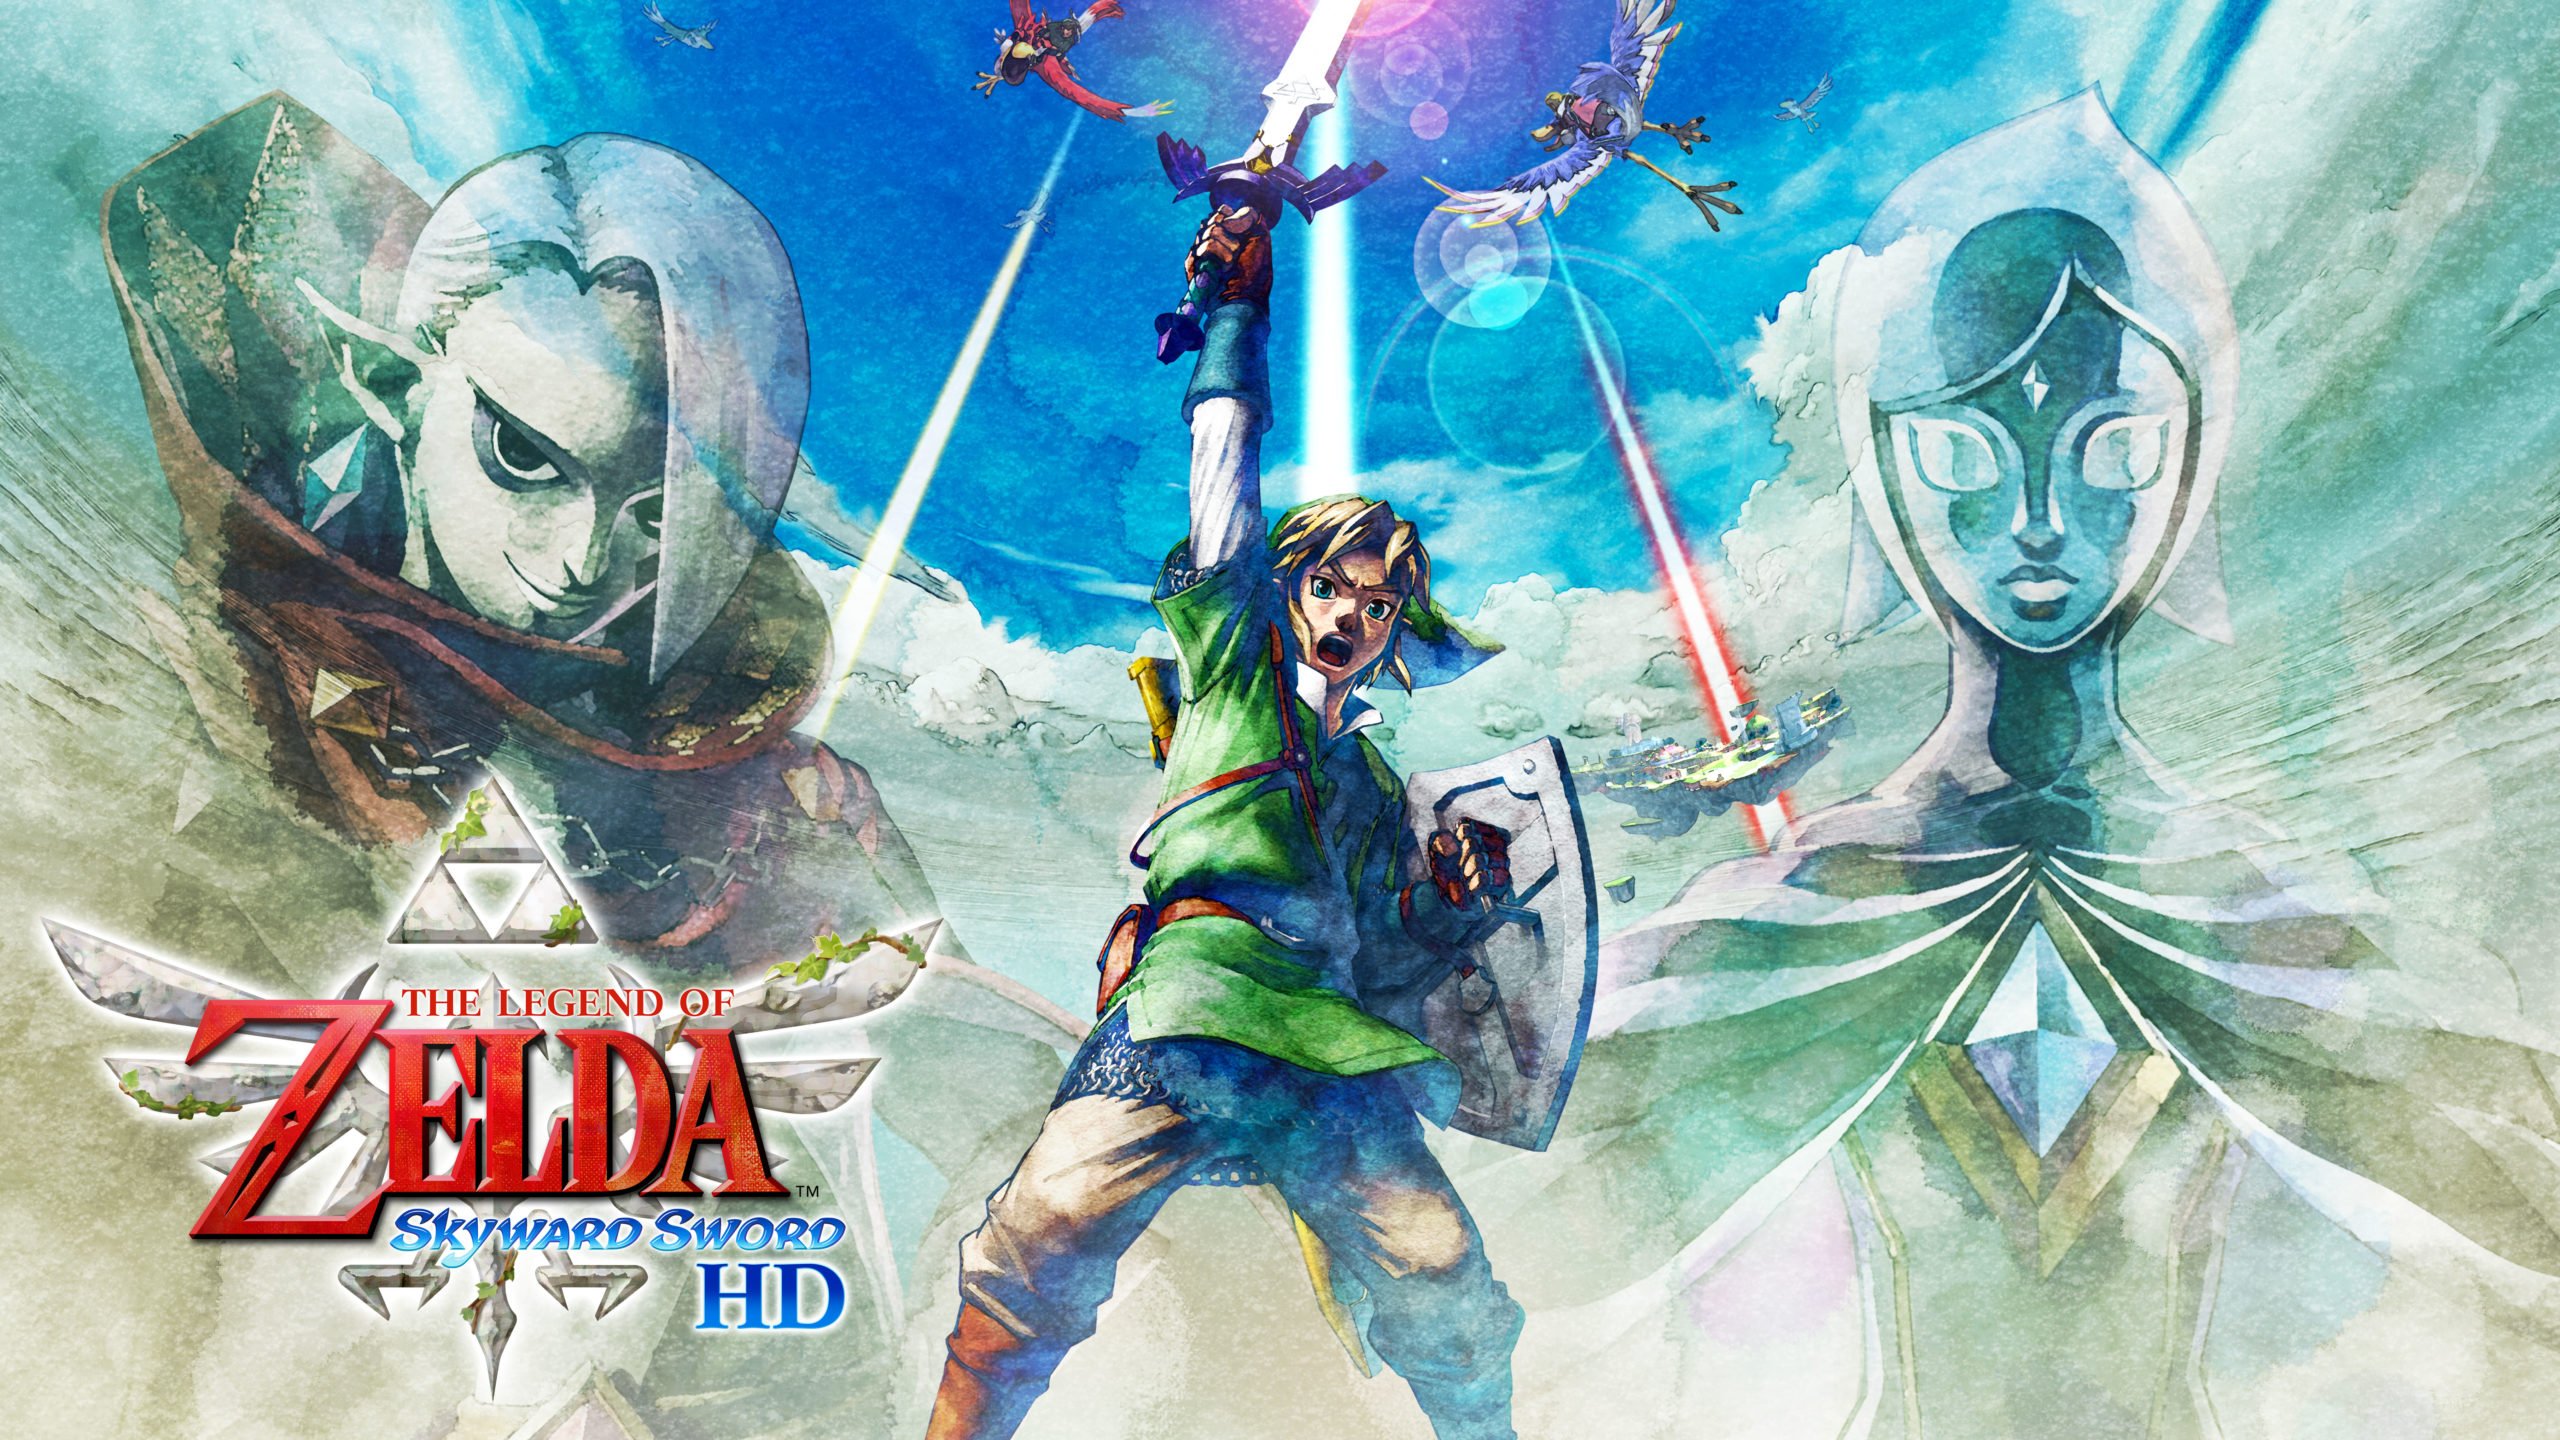 Zelda: Skyward Sword comes to Switch with 60fps graphics and new controls